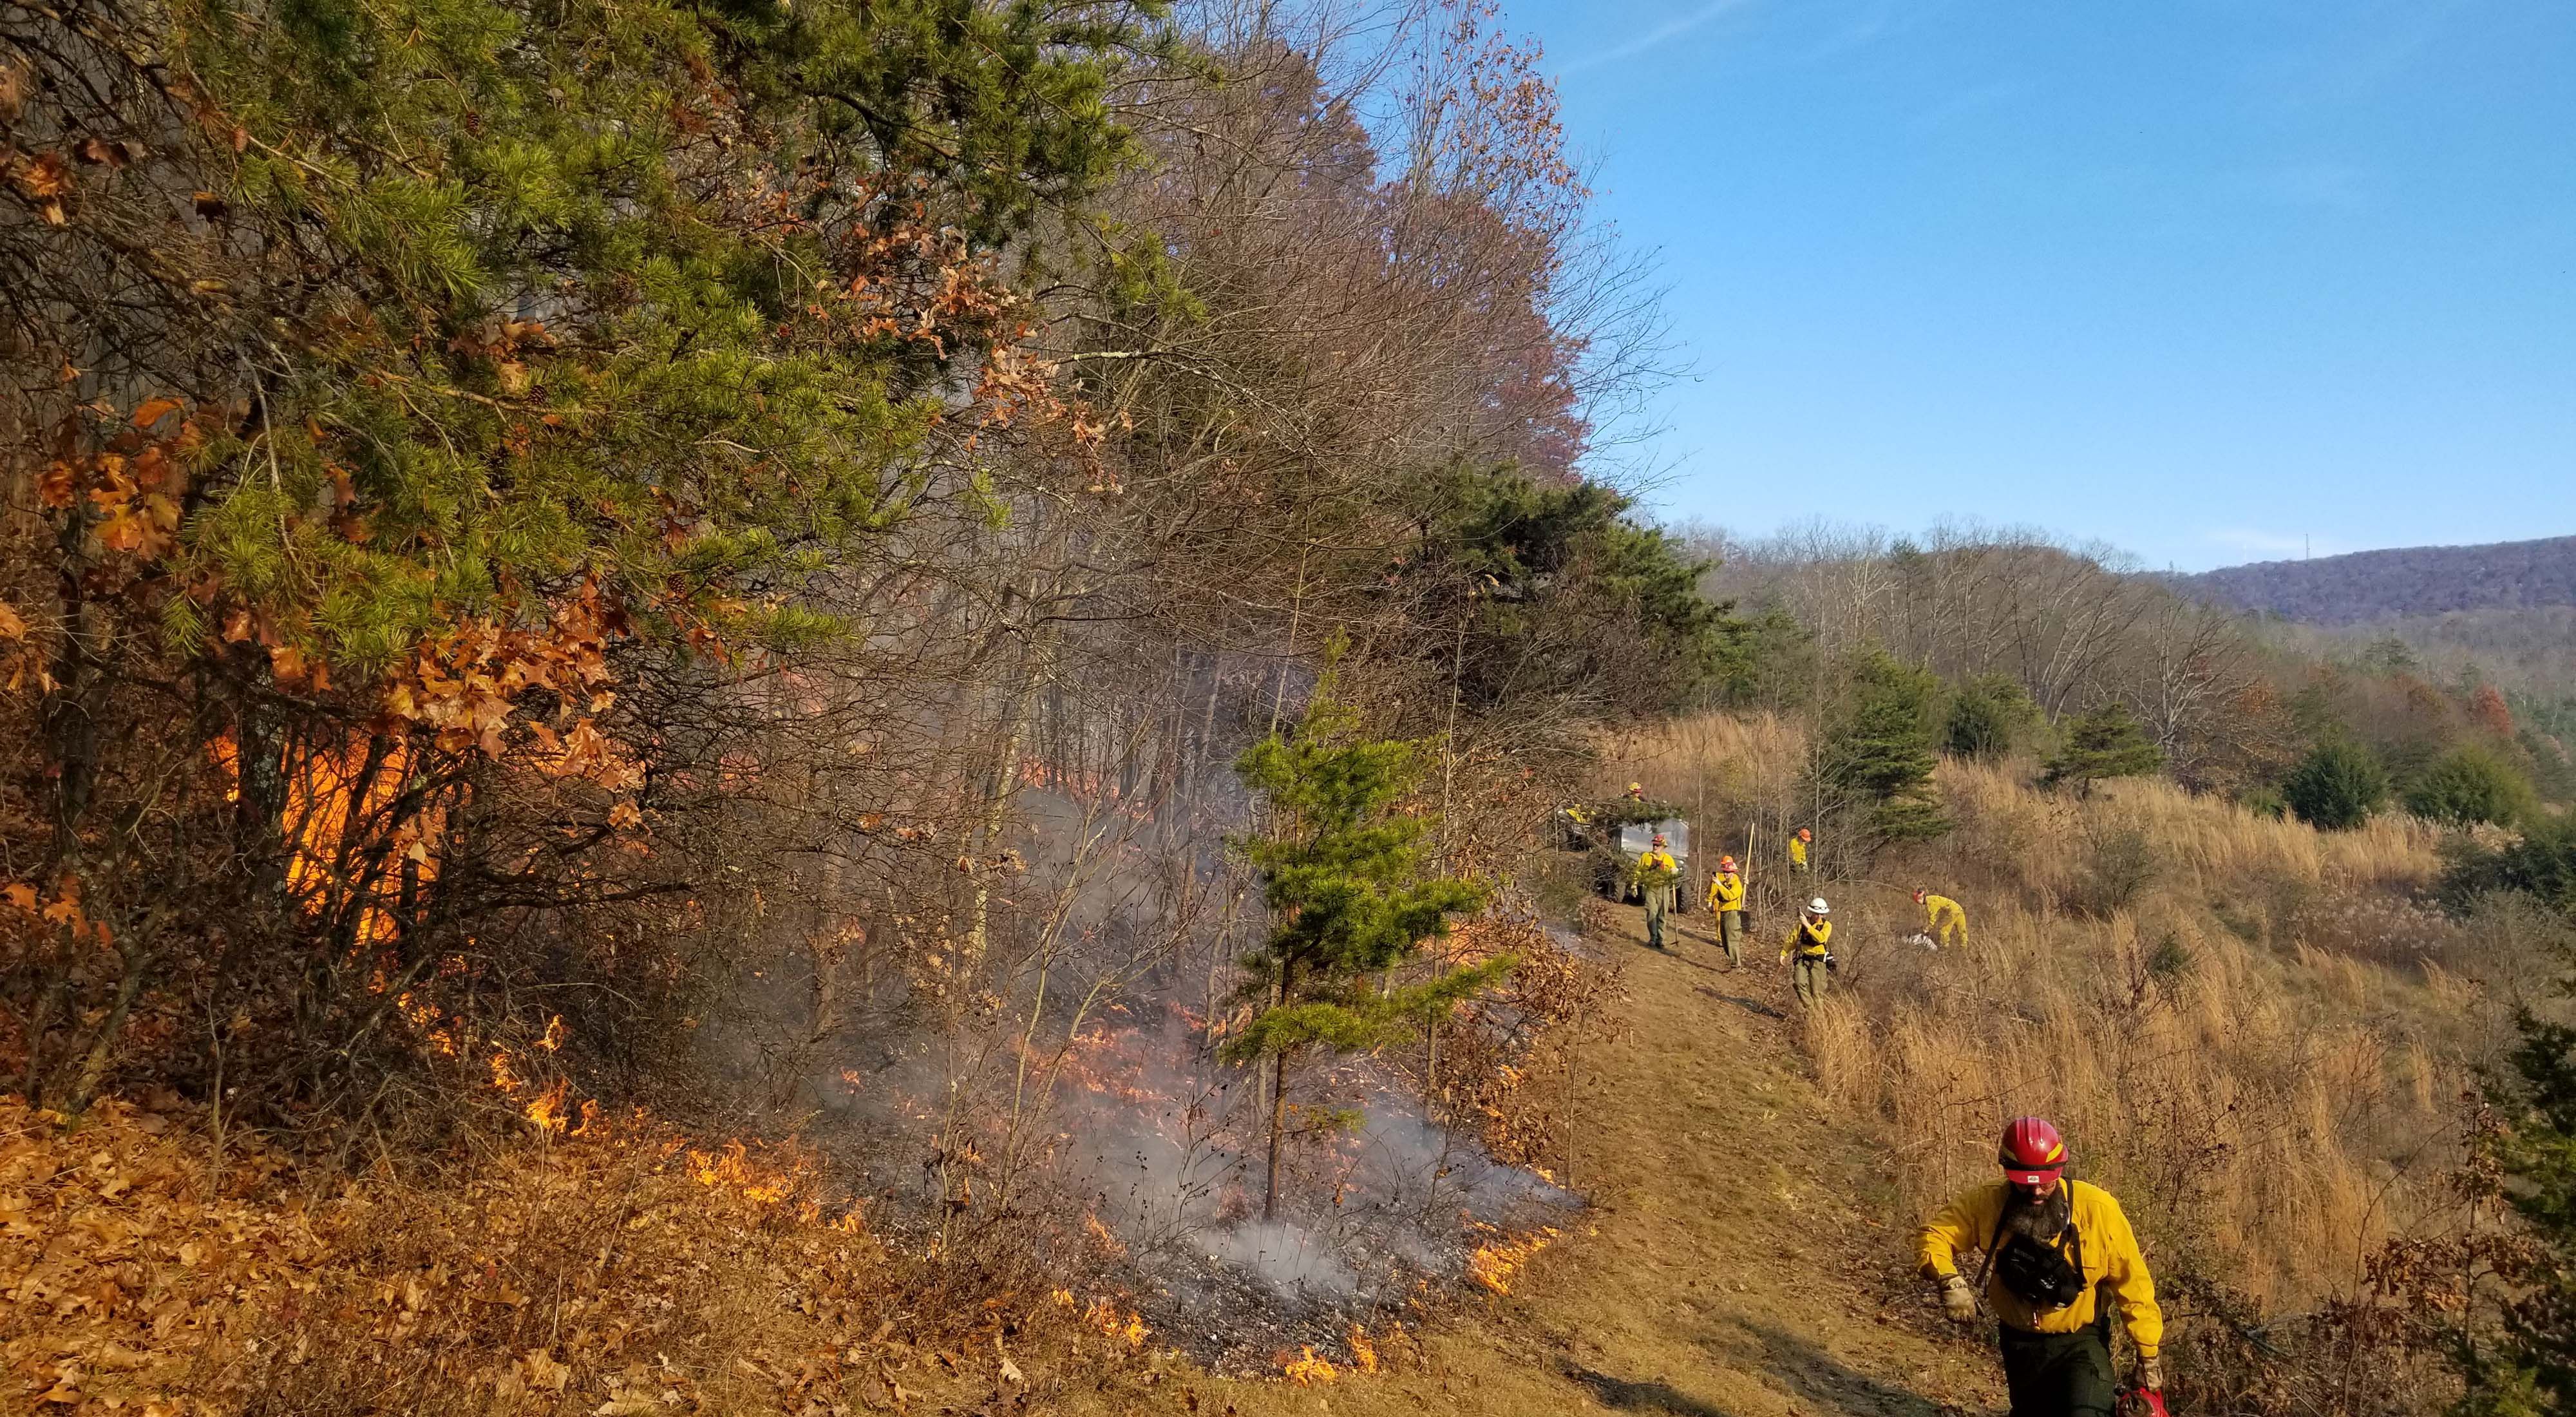 Low intensity fire moves up a wooded slope as seven members of a TNC crew monitor the fire line during a controlled burn.